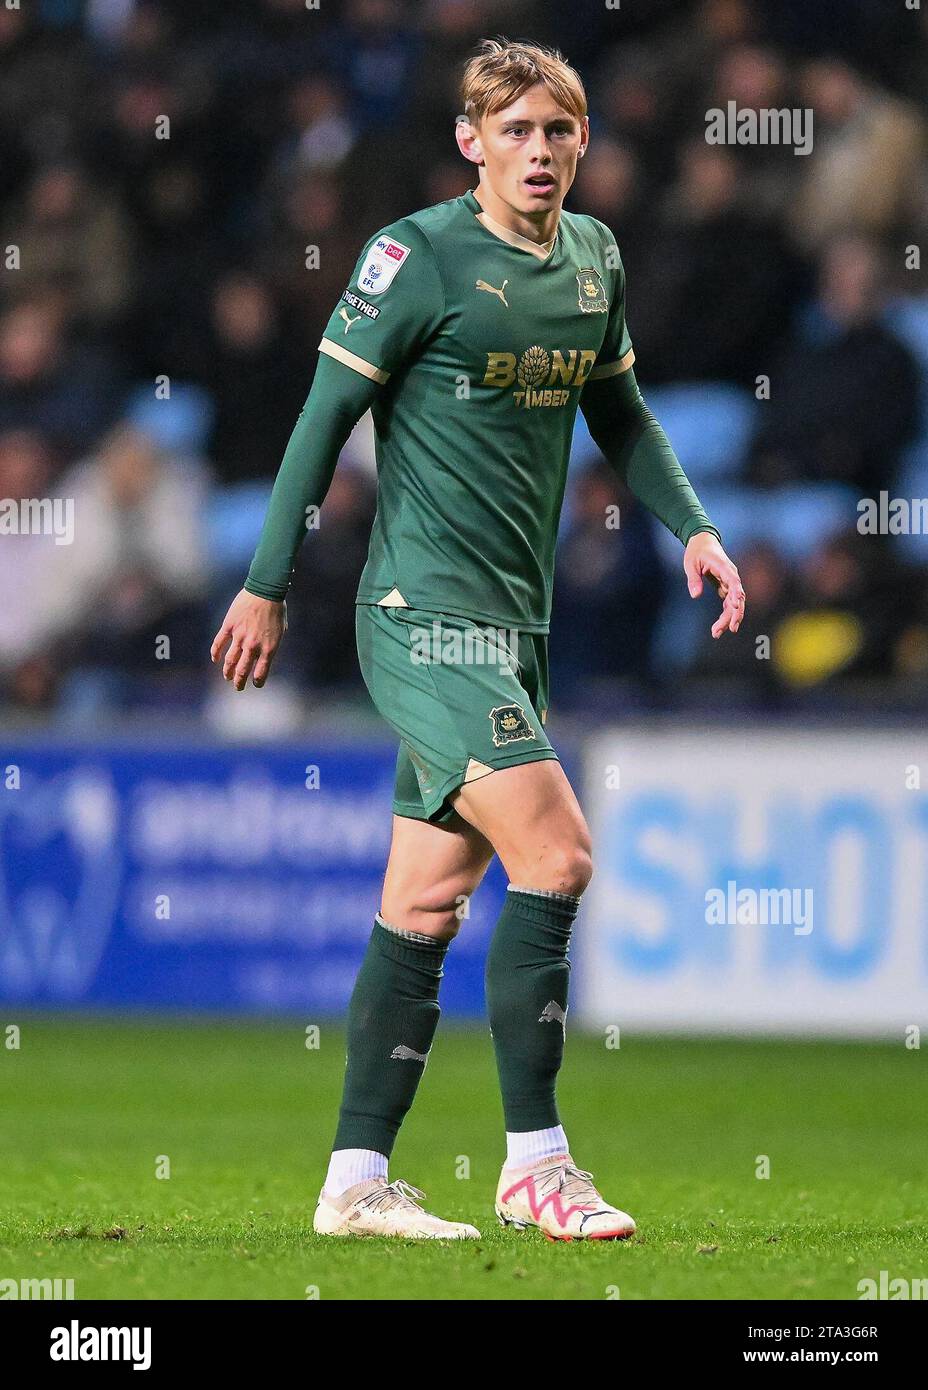 Ben Waine #23 of Plymouth Argyle /iua/ during the Sky Bet Championship match Coventry City vs Plymouth Argyle at Coventry Building Society Arena, Coventry, United Kingdom, 28th November 2023  (Photo by Stan Kasala/News Images) Stock Photo